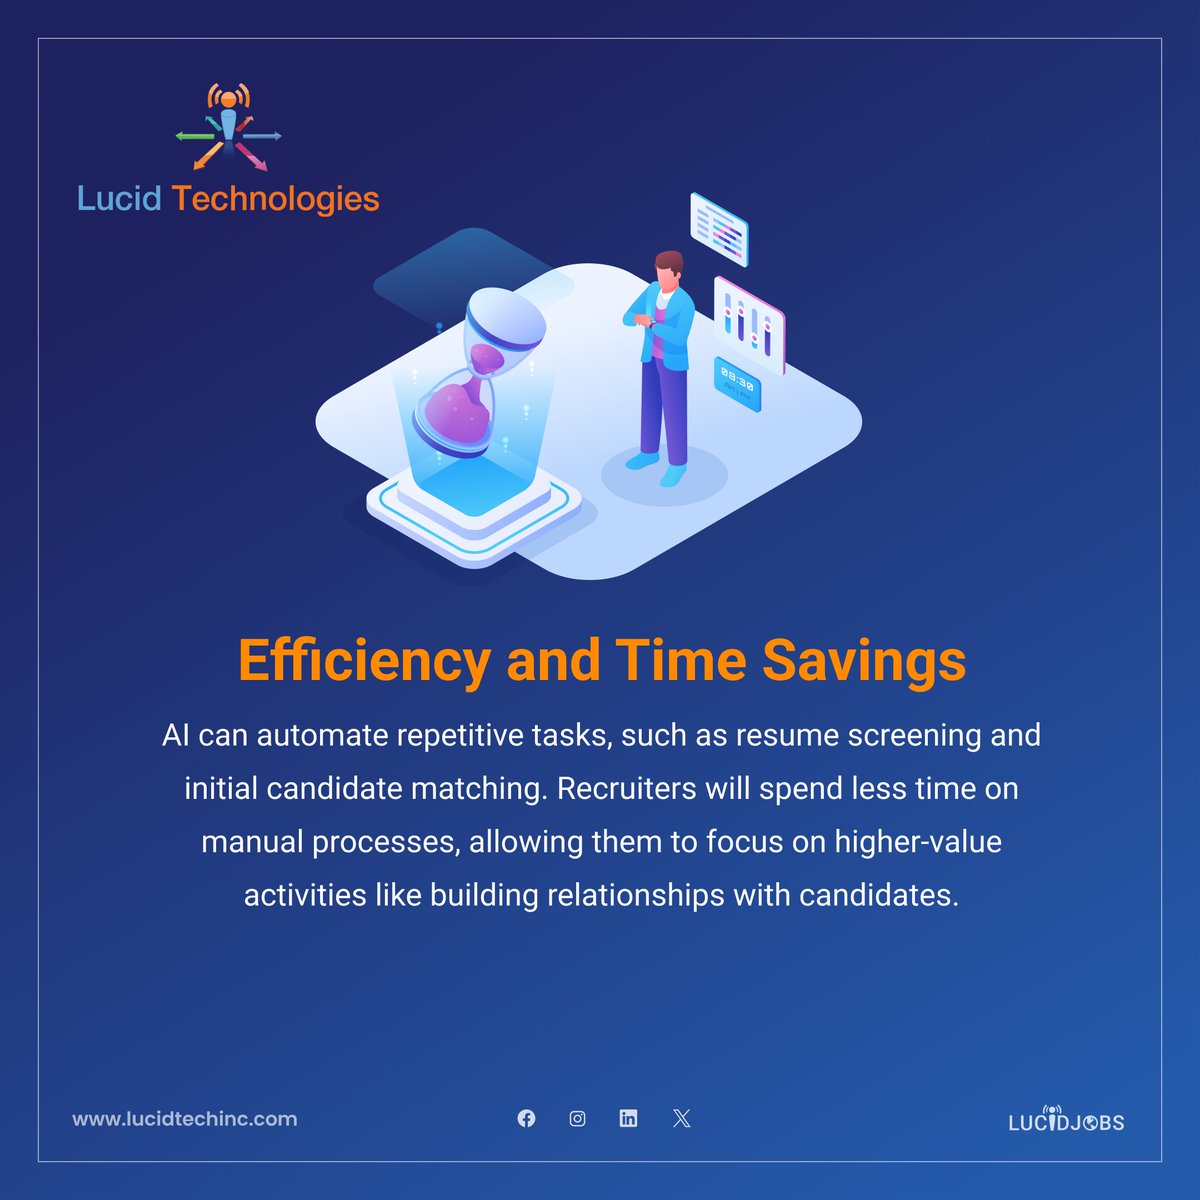 🌟 AI Boosts Efficiency & Saves Time! Recruiters Focus on Relationships. 🤖👥

#ai #technology #trending #timesaving #efficiency #Focus